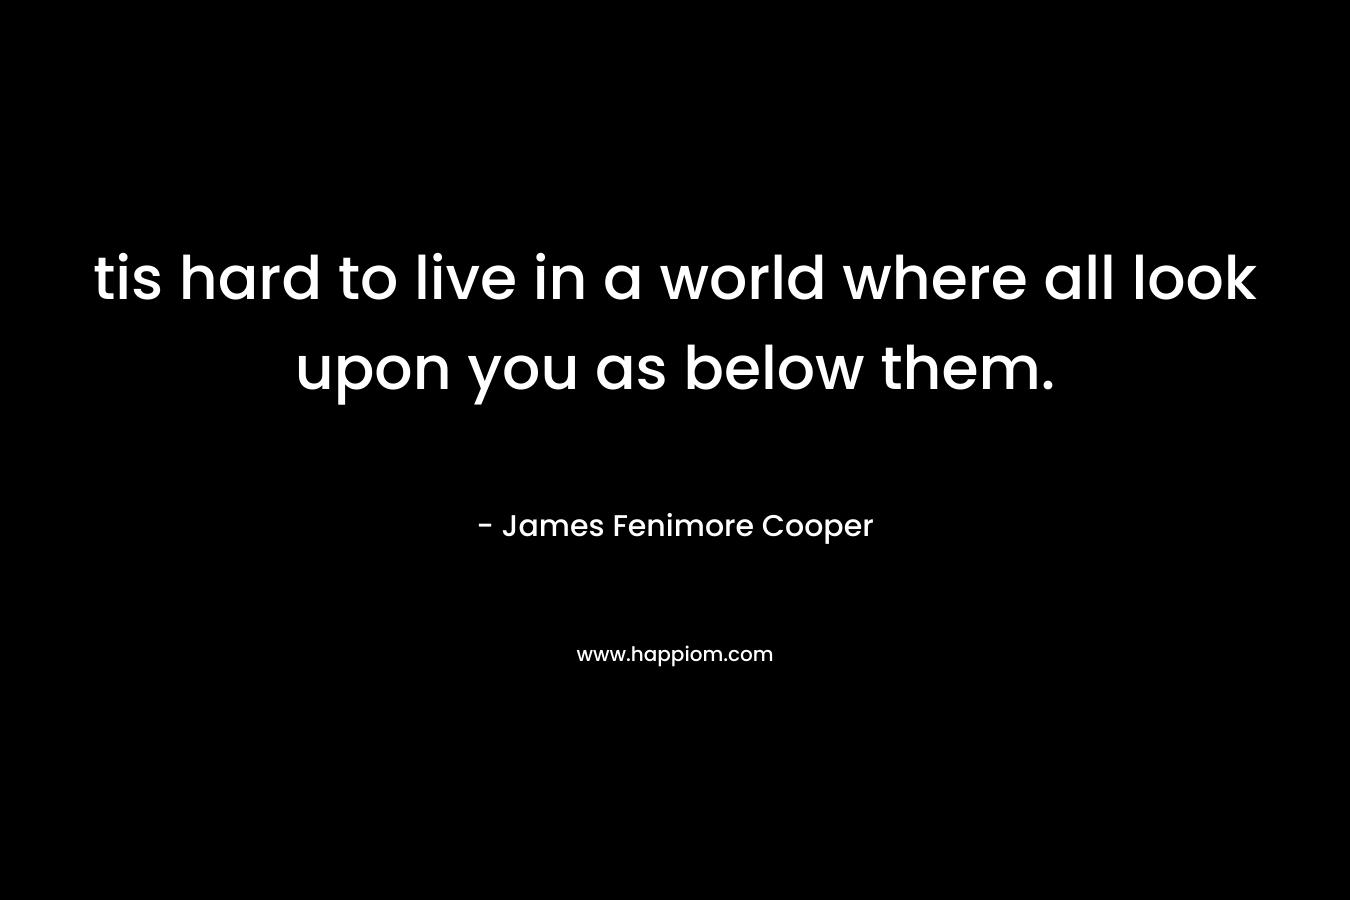 tis hard to live in a world where all look upon you as below them. – James Fenimore Cooper